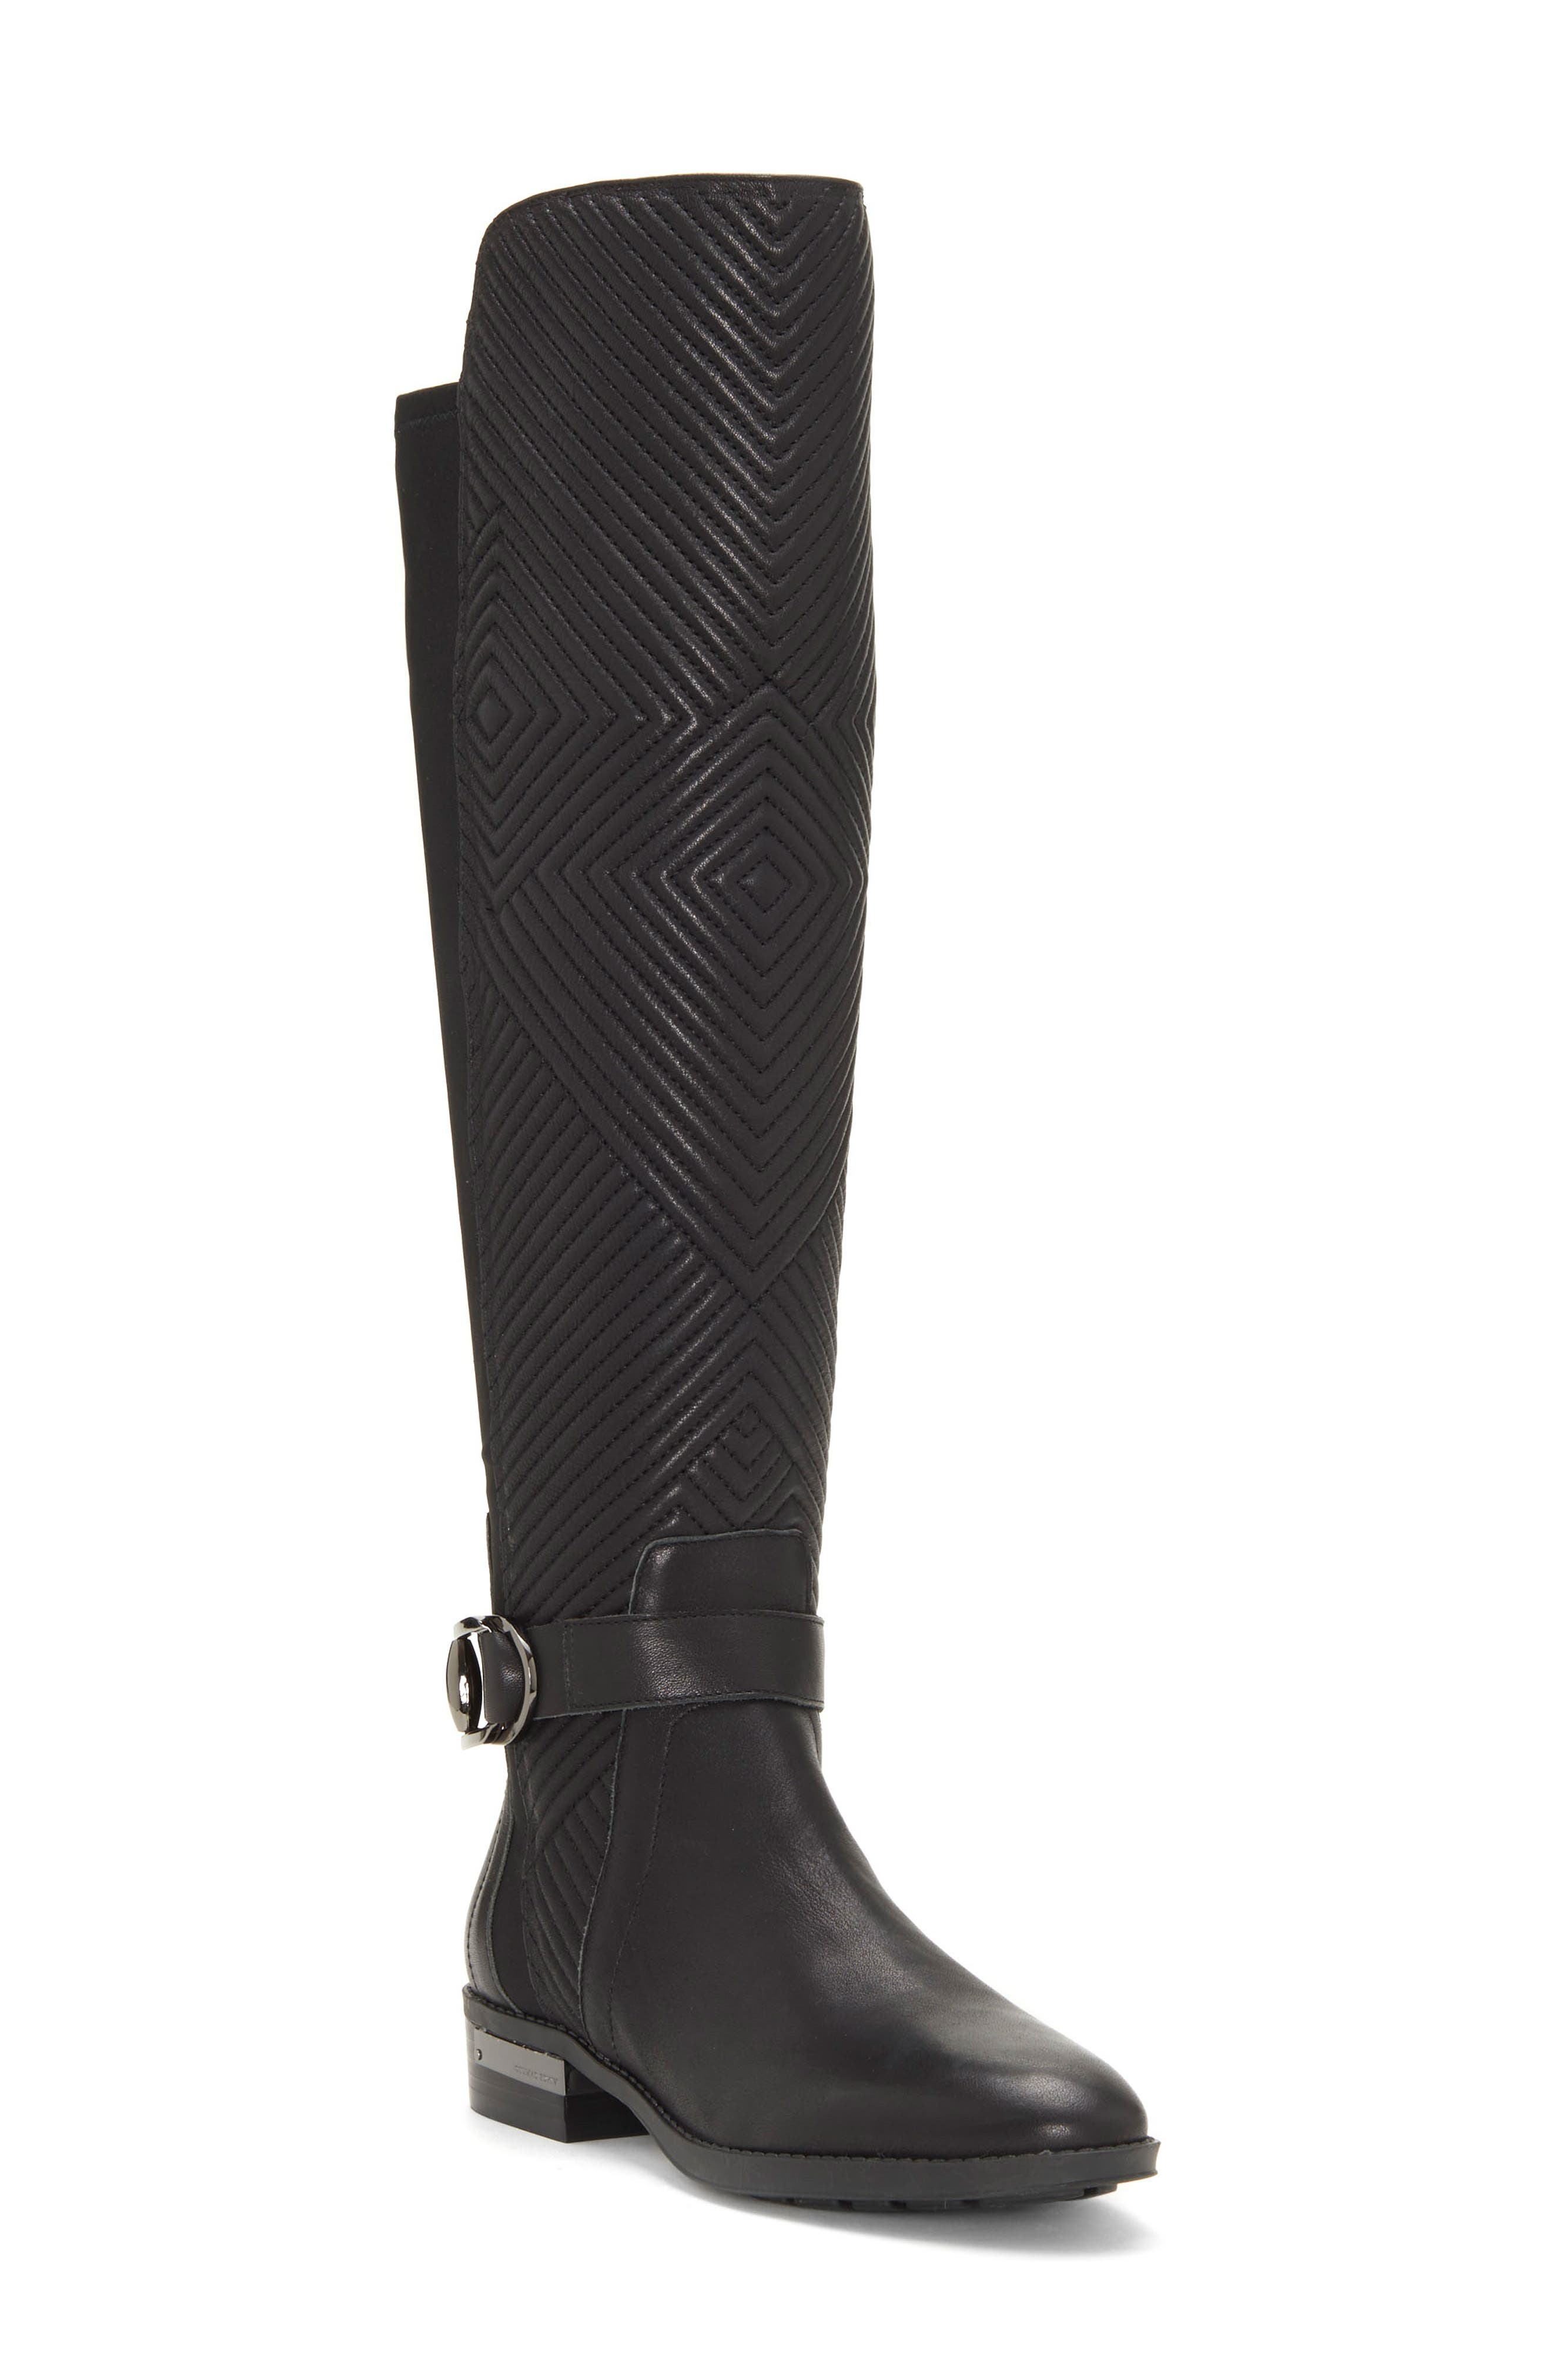 vince camuto black and gold boots